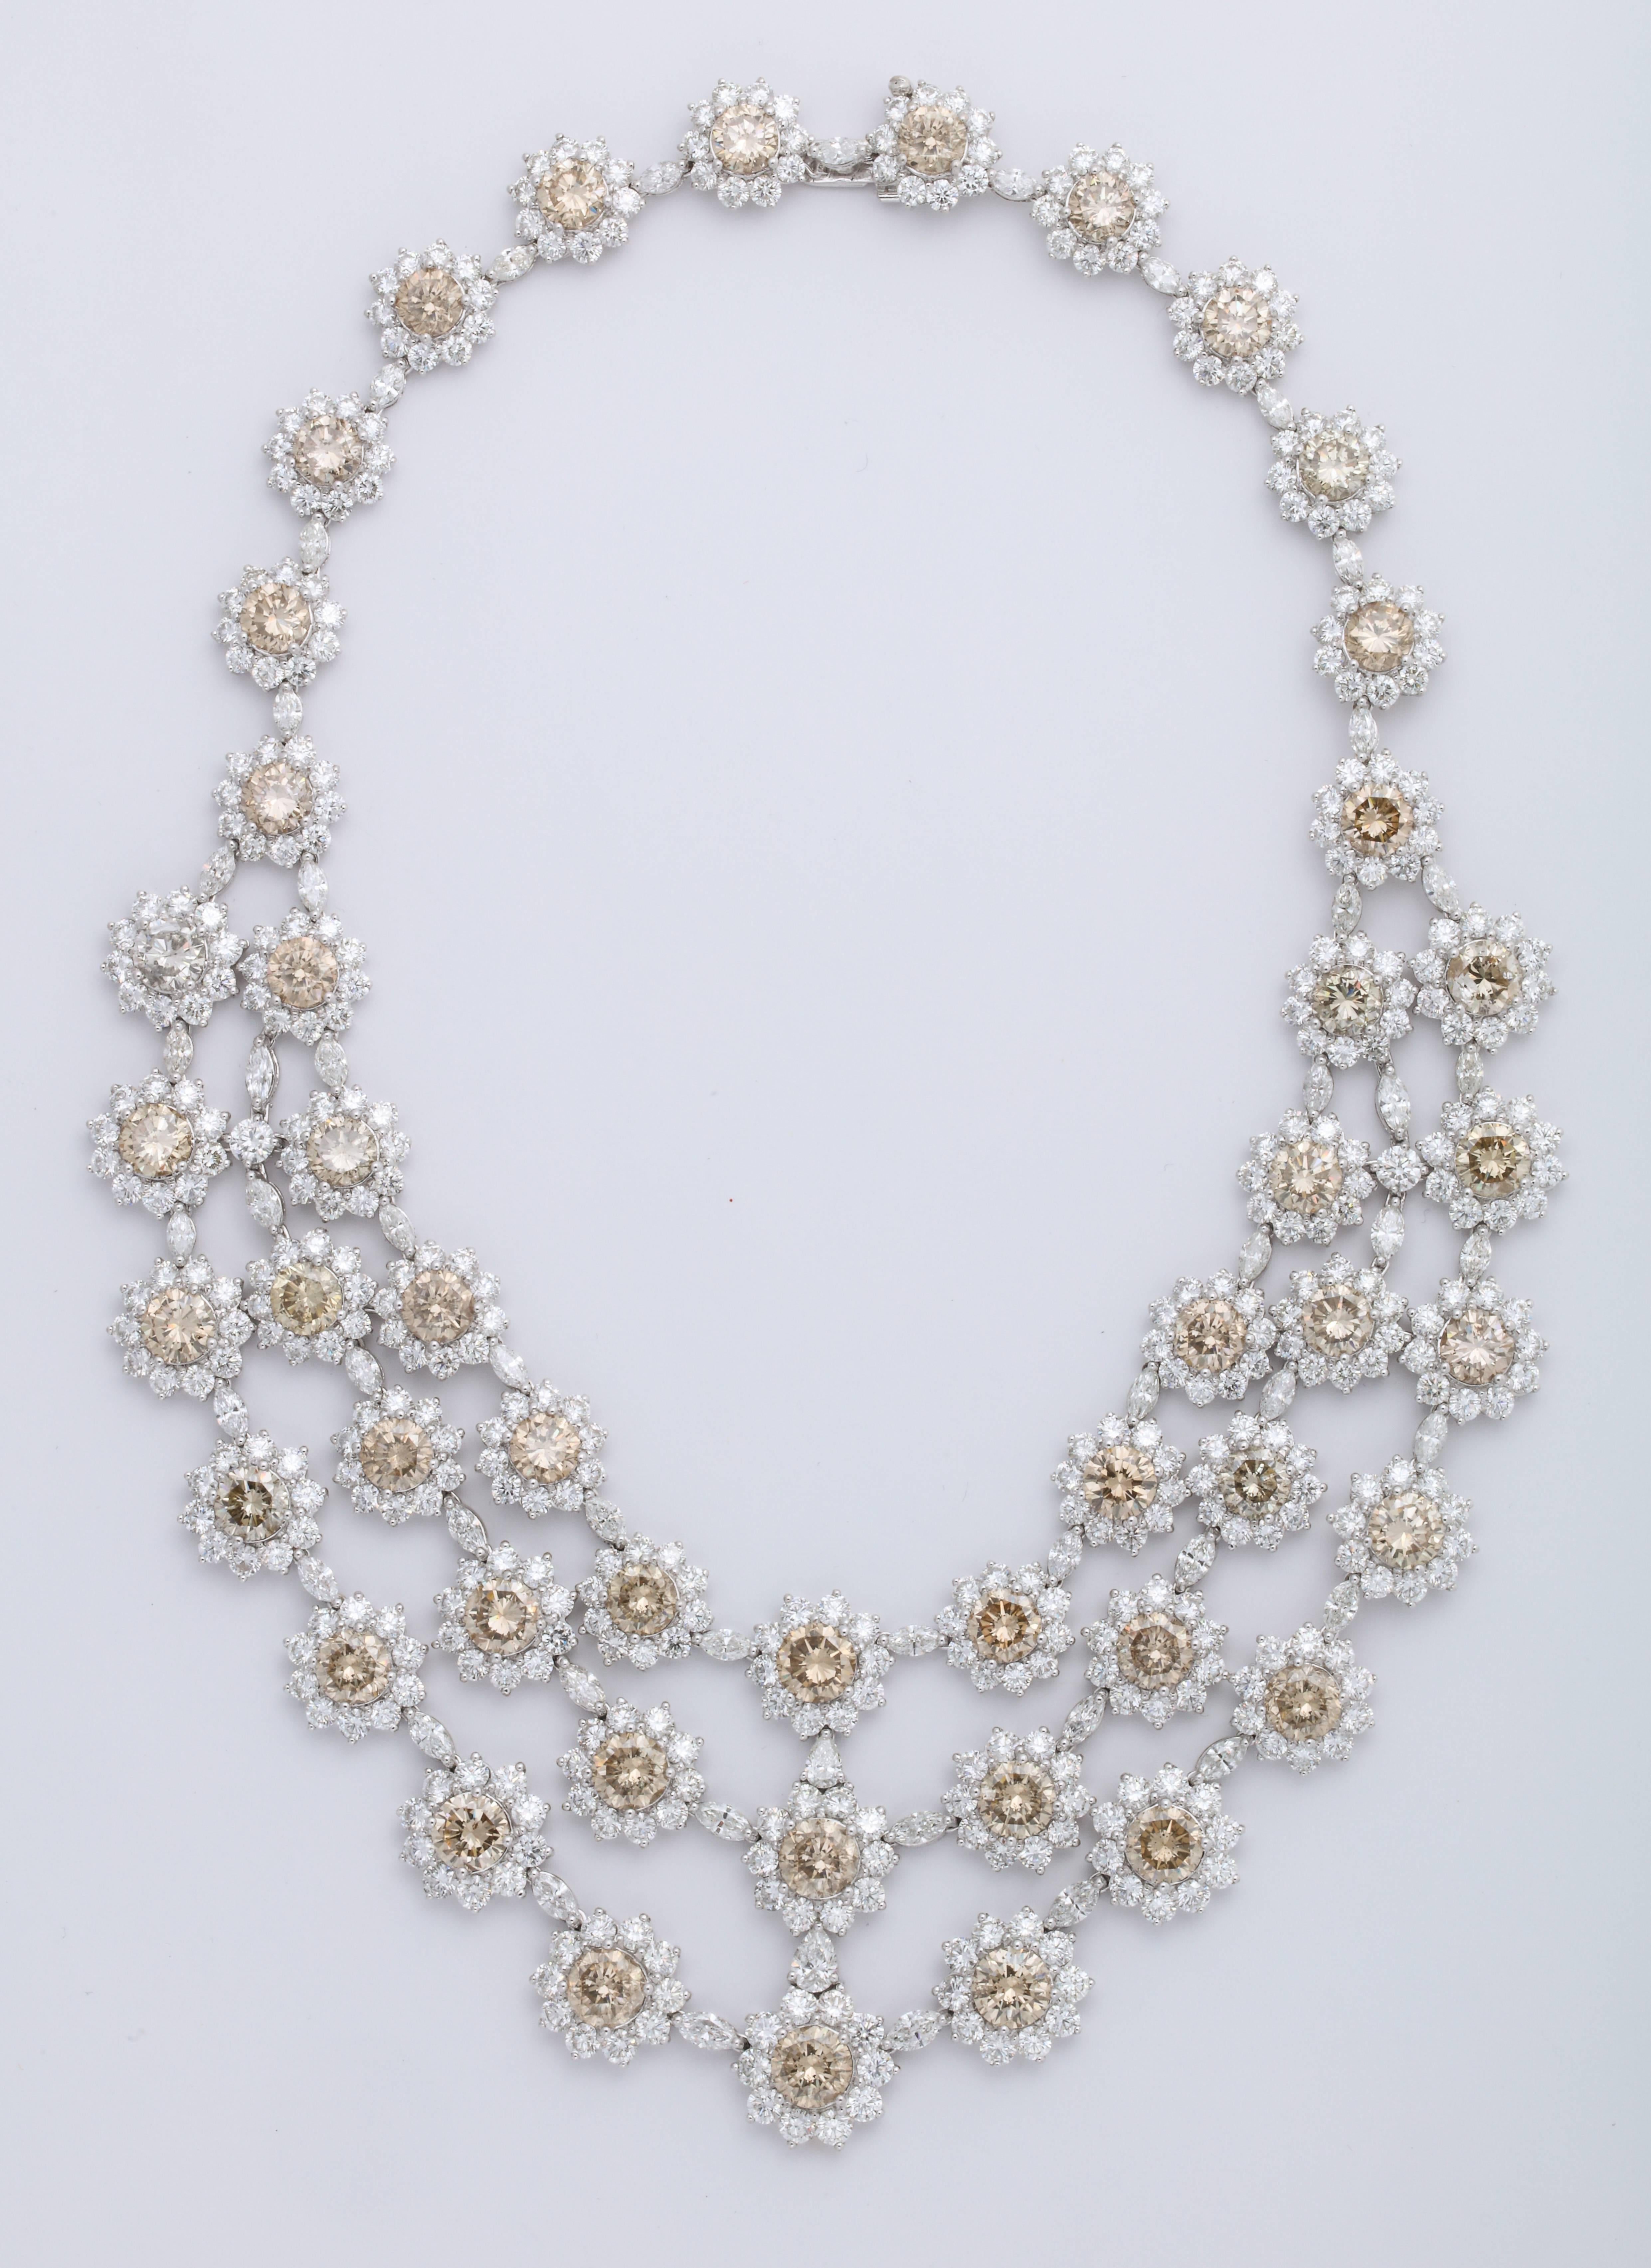 Crowning the Red Carpet is the Glamorous 18K white gold tapering triple strand necklace mounted with 47 calibrated natural color champagne, round brilliant-cut diamonds: 68.57 carats, each decorated with round brilliant-cut colorless diamond